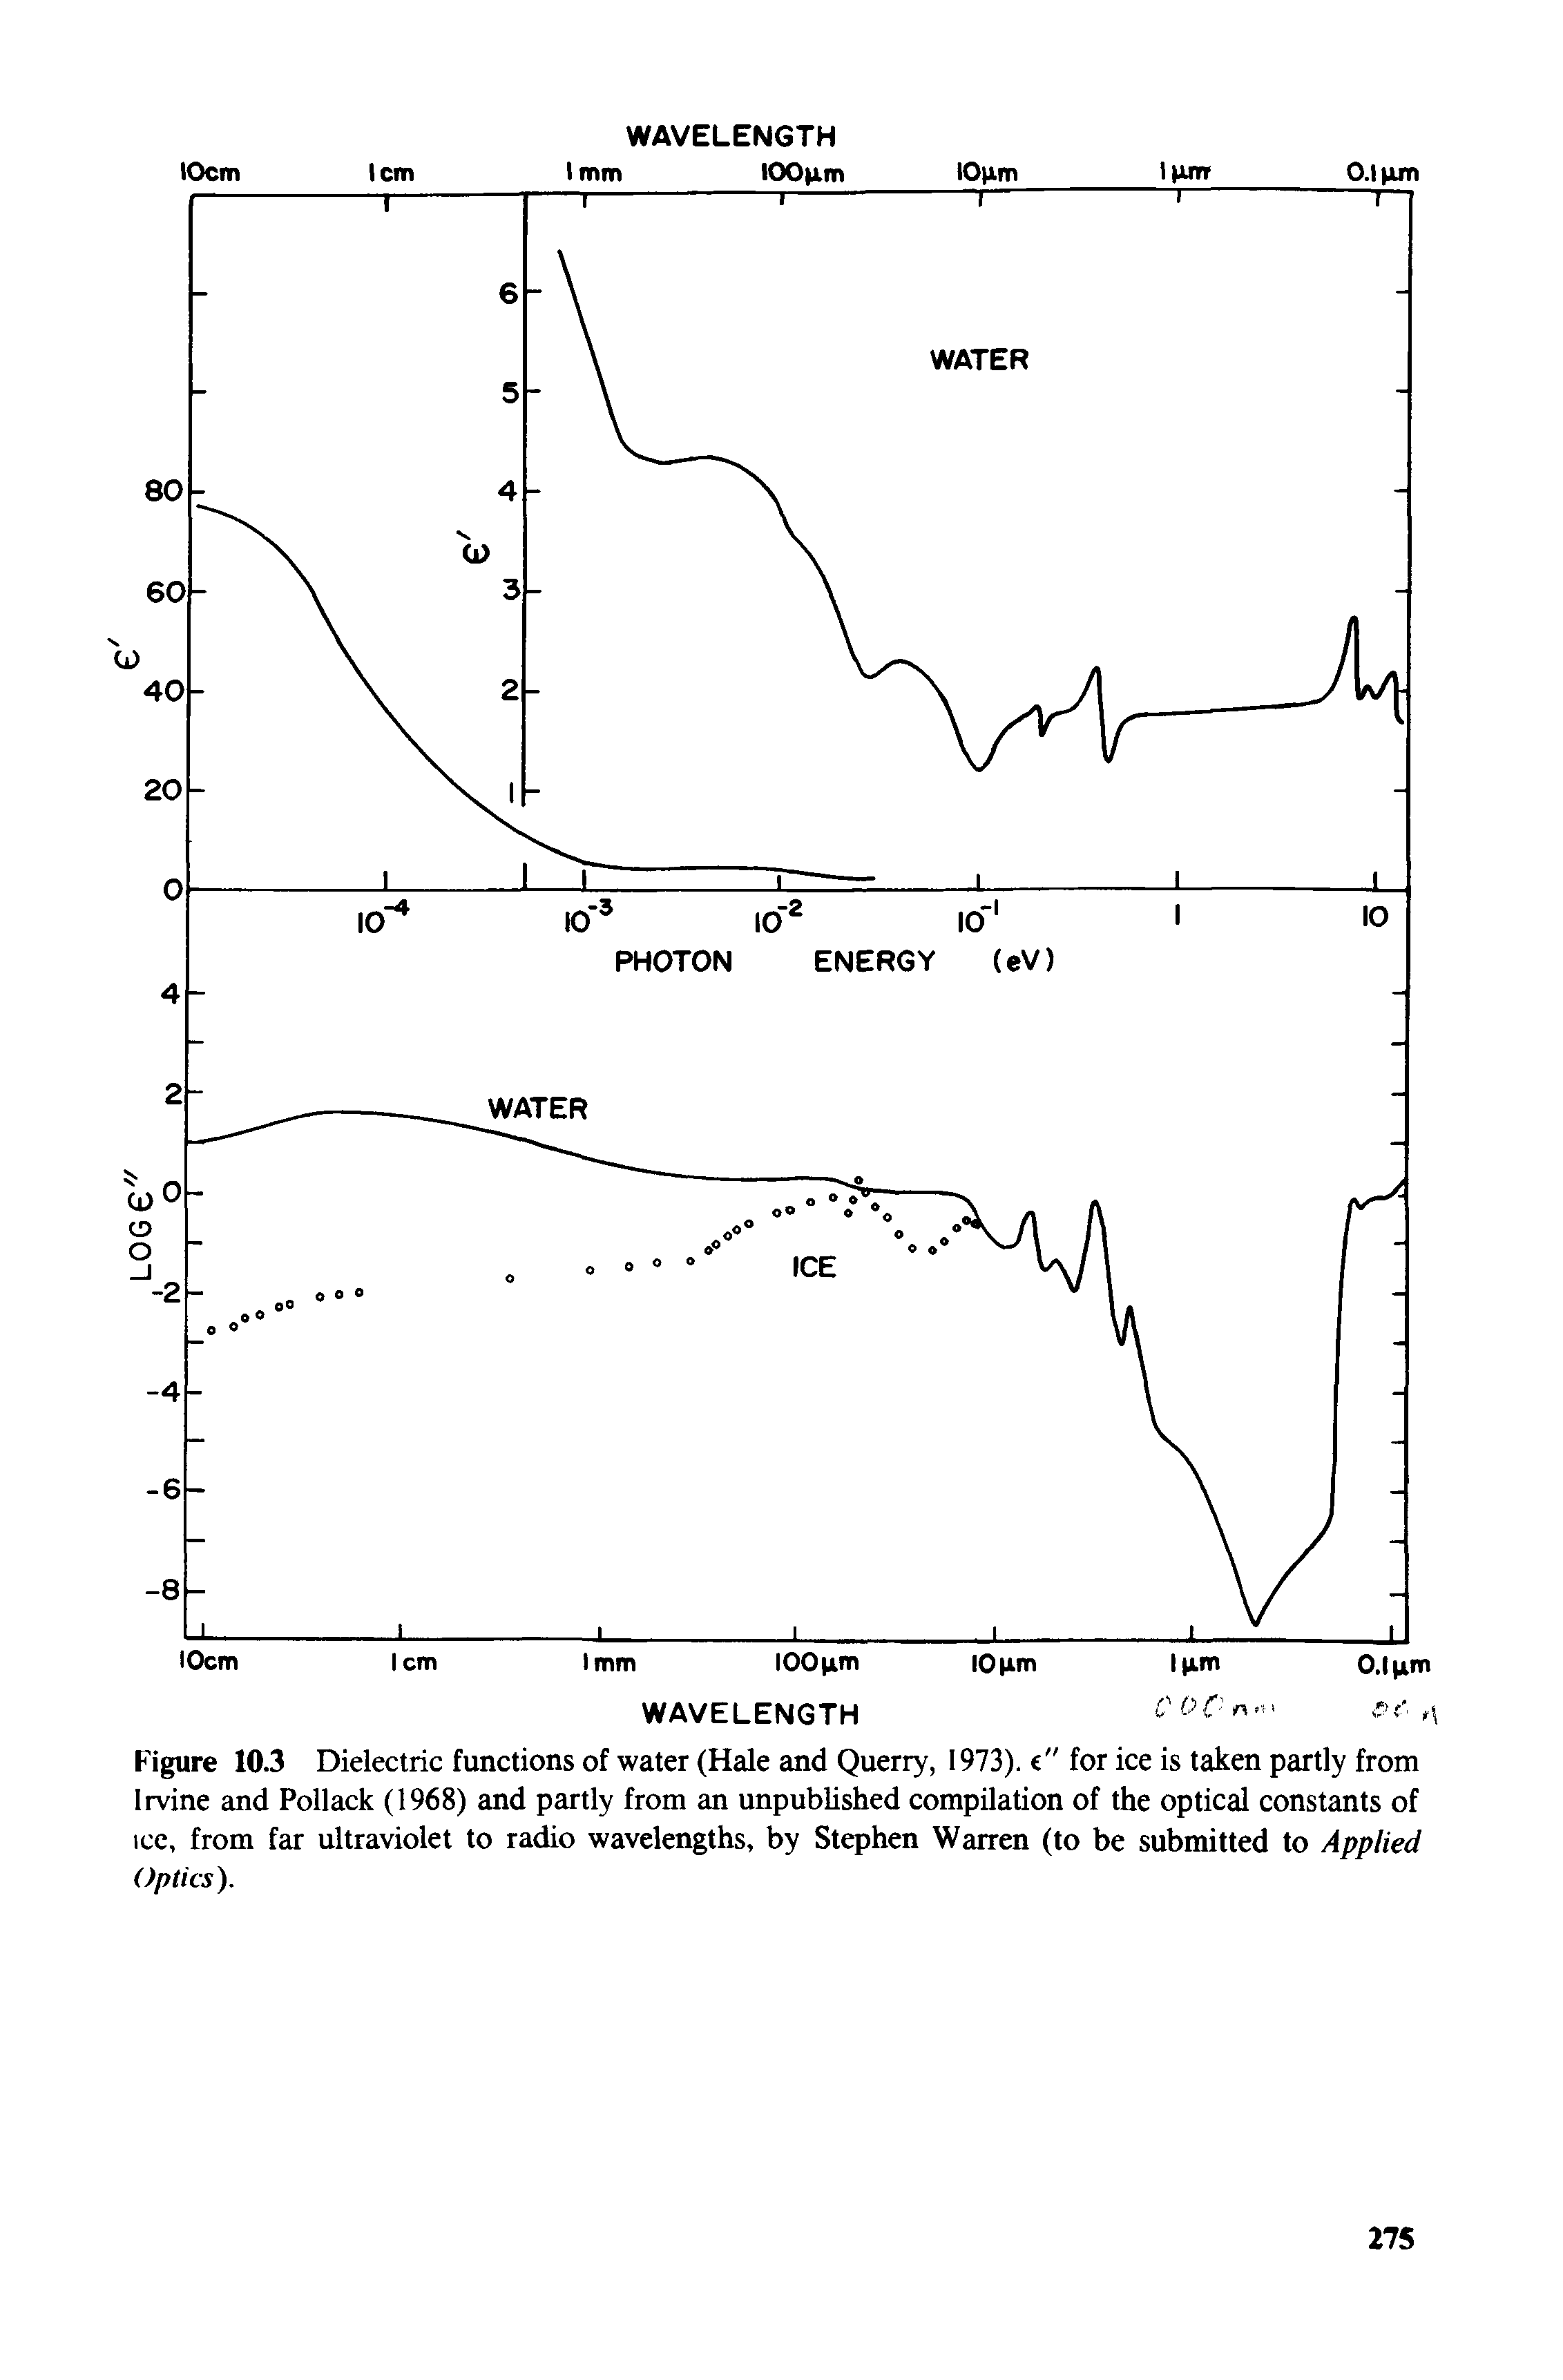 Figure 10.3 Dielectric functions of water (Hale and Querry, 1973). c" for ice is taken partly from Irvine and Pollack (1968) and partly from an unpublished compilation of the optical constants of ice, from far ultraviolet to radio wavelengths, by Stephen Warren (to be submitted to Applied Optics).